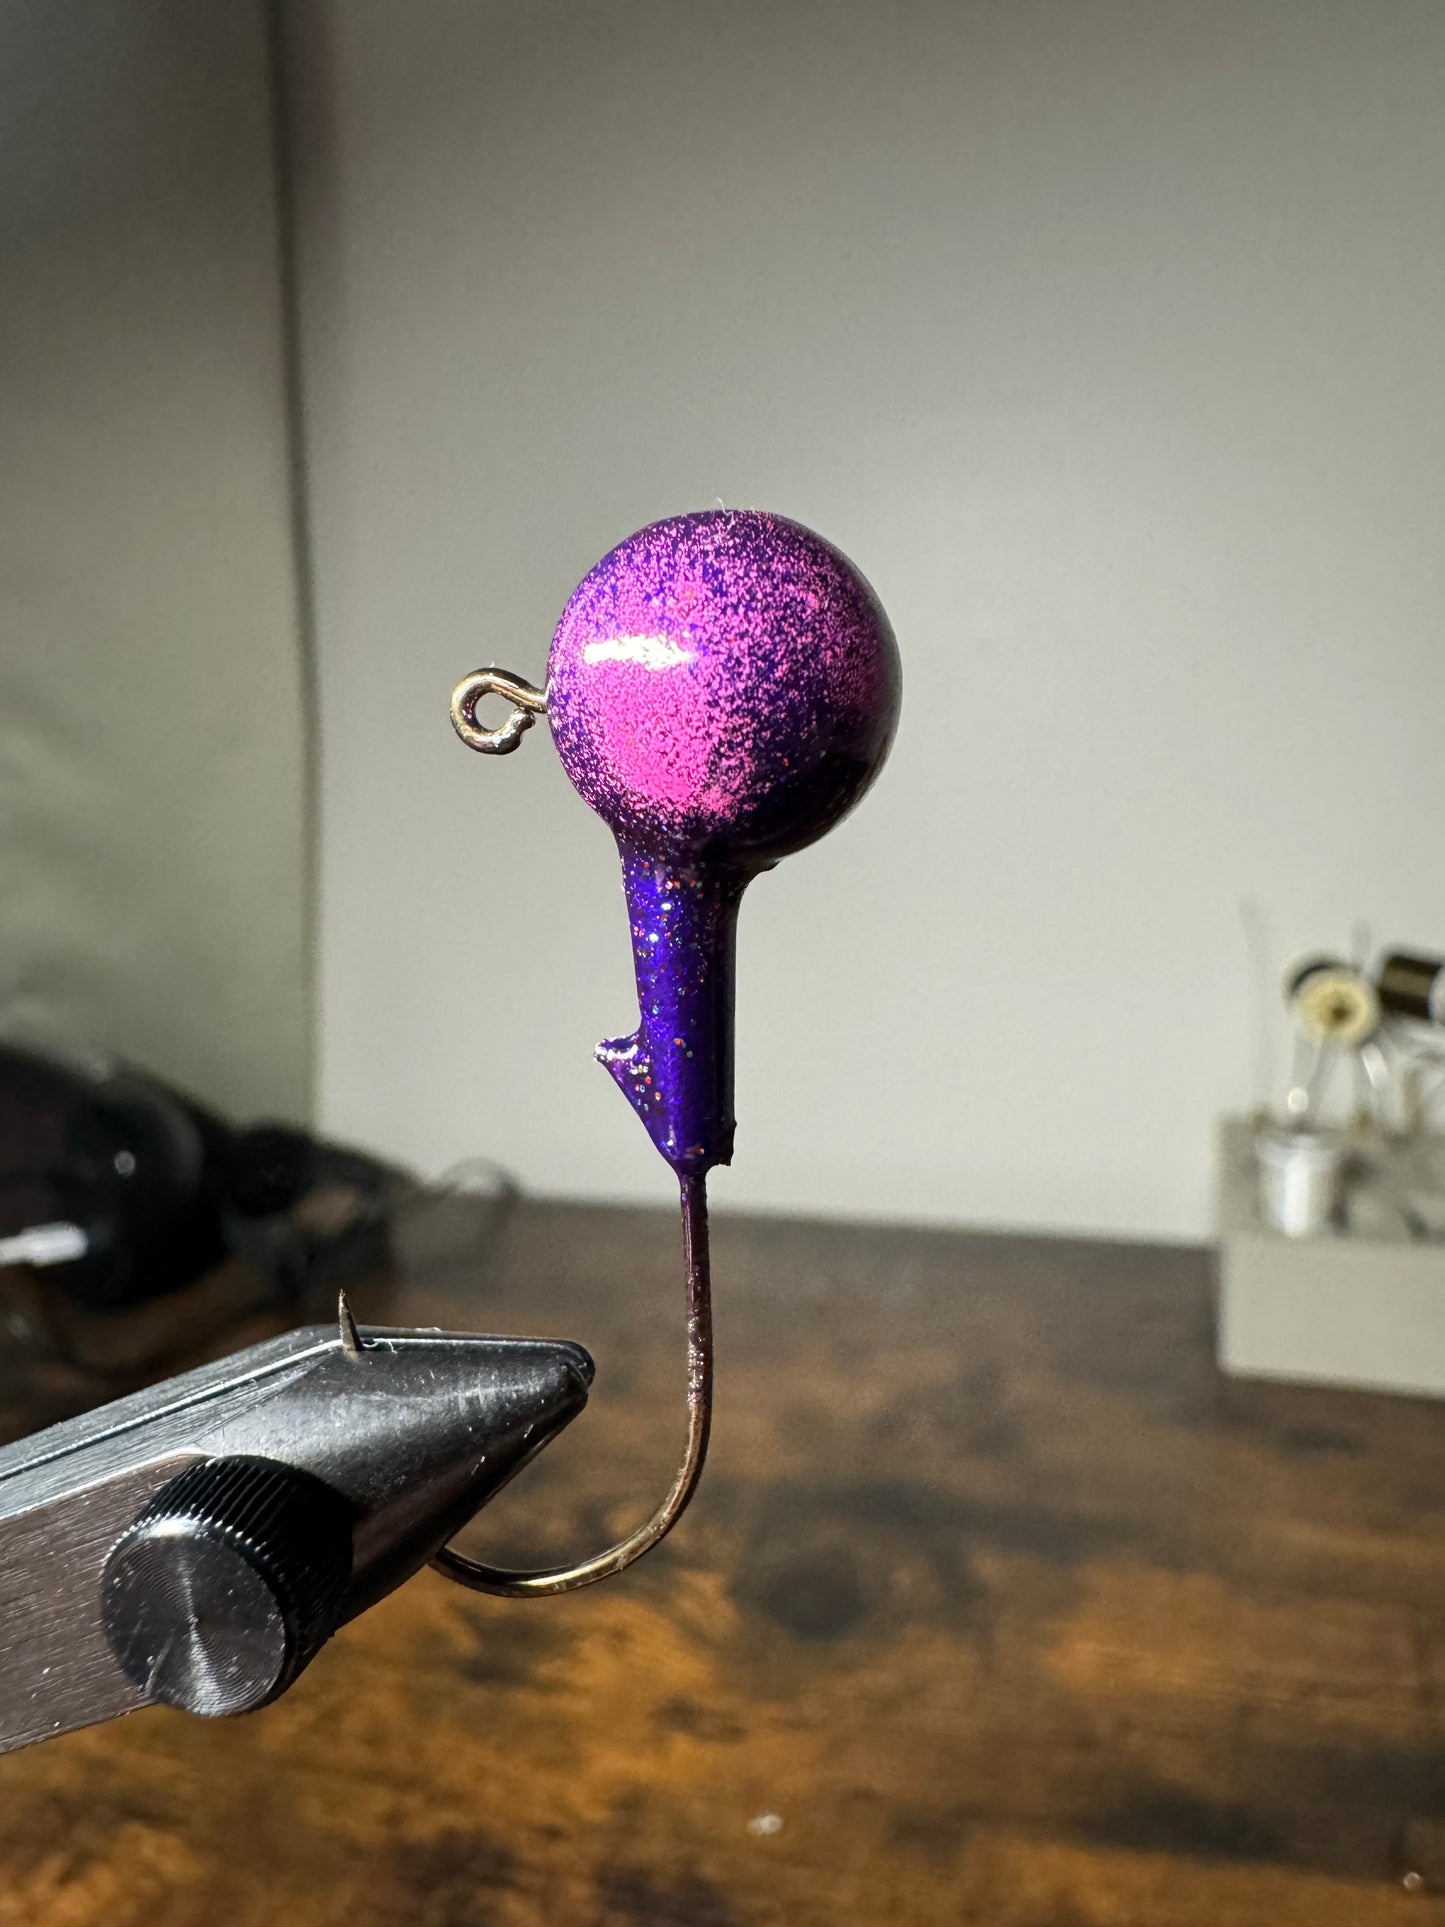 Pink and purple lead free jig for bass and walleye with bait keeper and clean hook eye